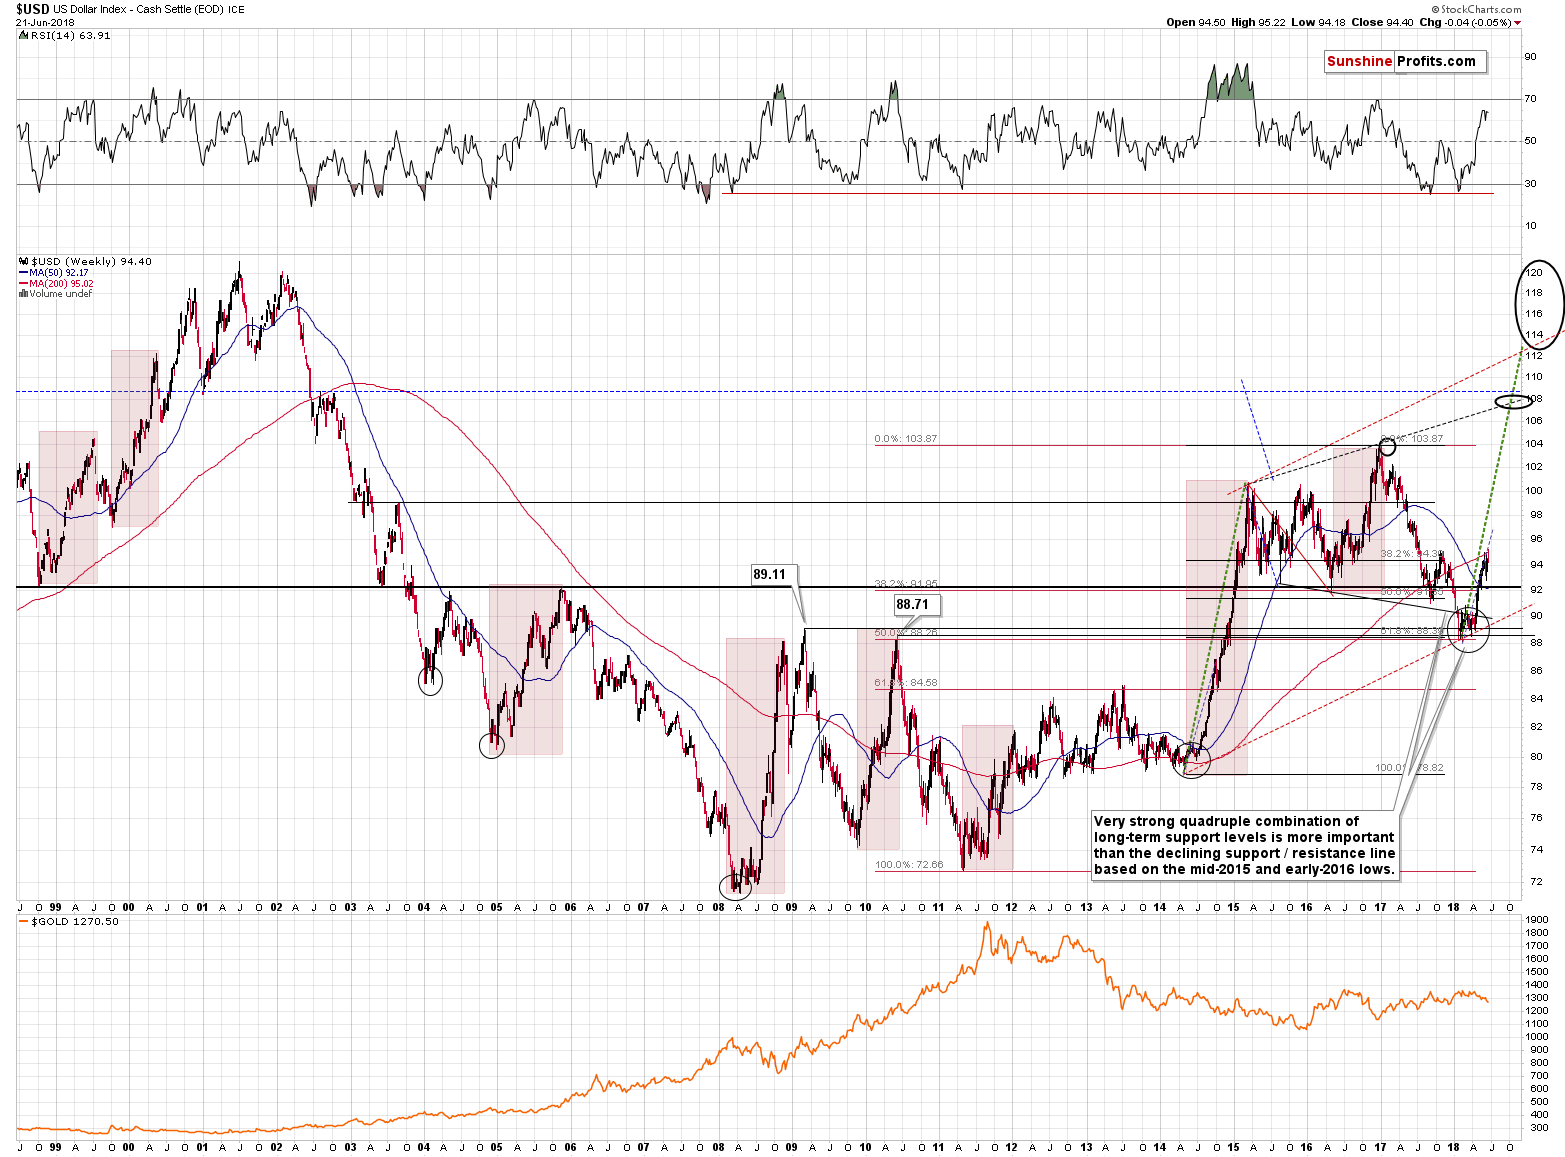 Gold and US Dollar - weekly price chart - USD